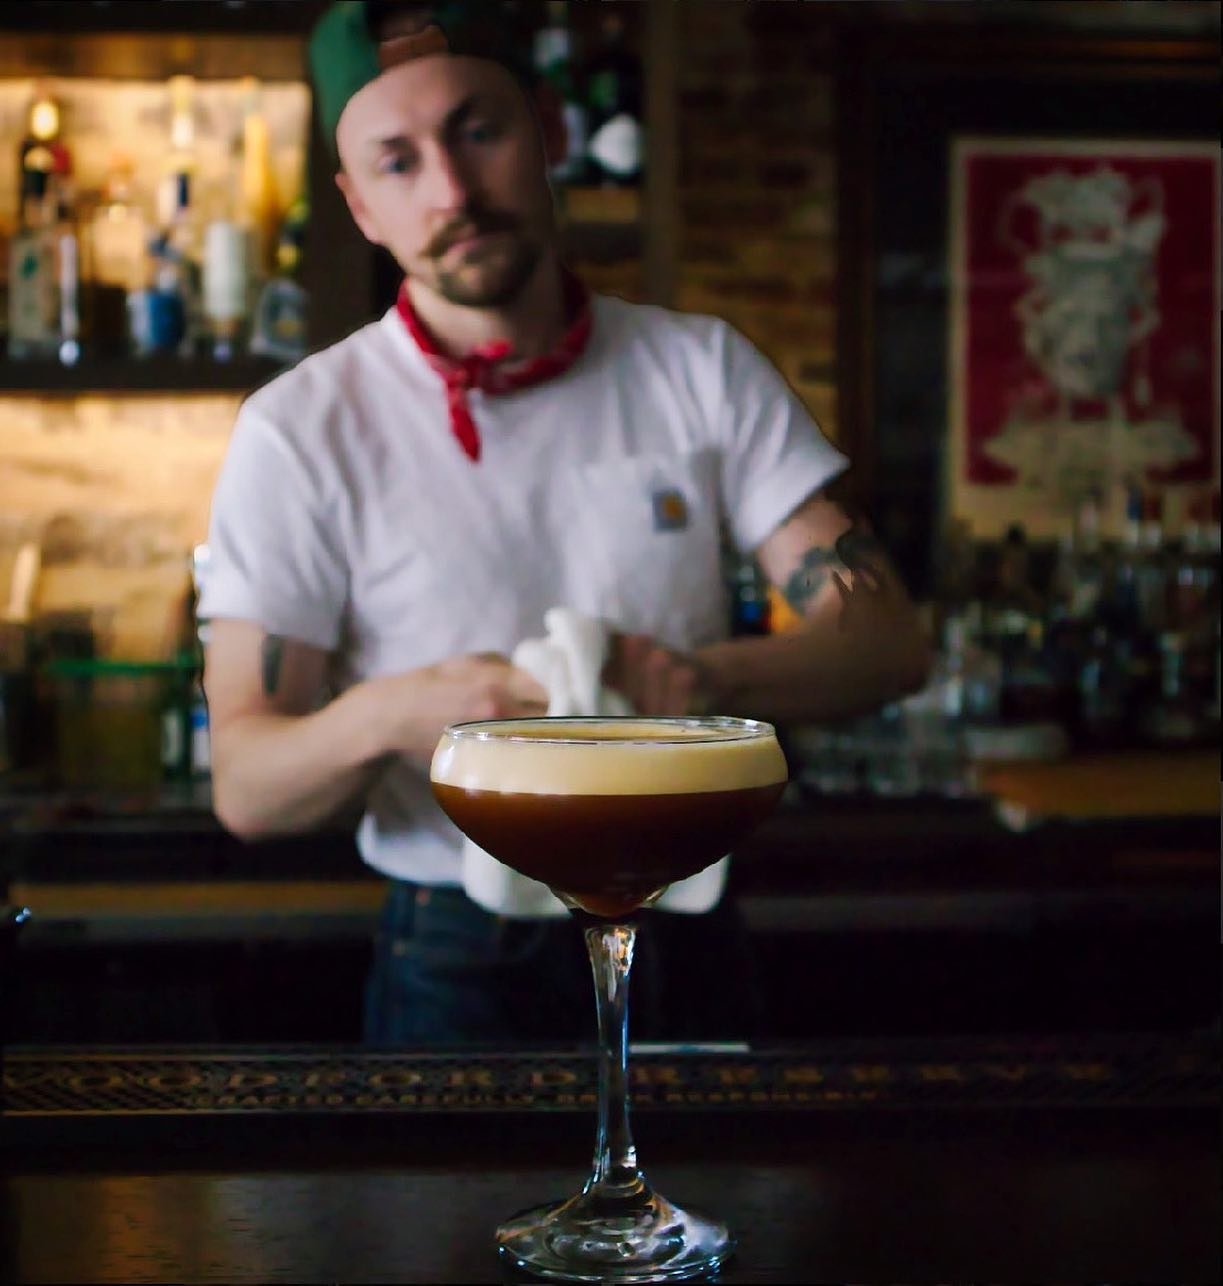 Every few years a trend comes back around we can totally get behind, which is why we couldn&rsquo;t be more jazzed to participate in the Mr. Black ESPRESSO MARTINI FEST! Have you tried our now infamous take on the jitter juice? Come sip for yourself&